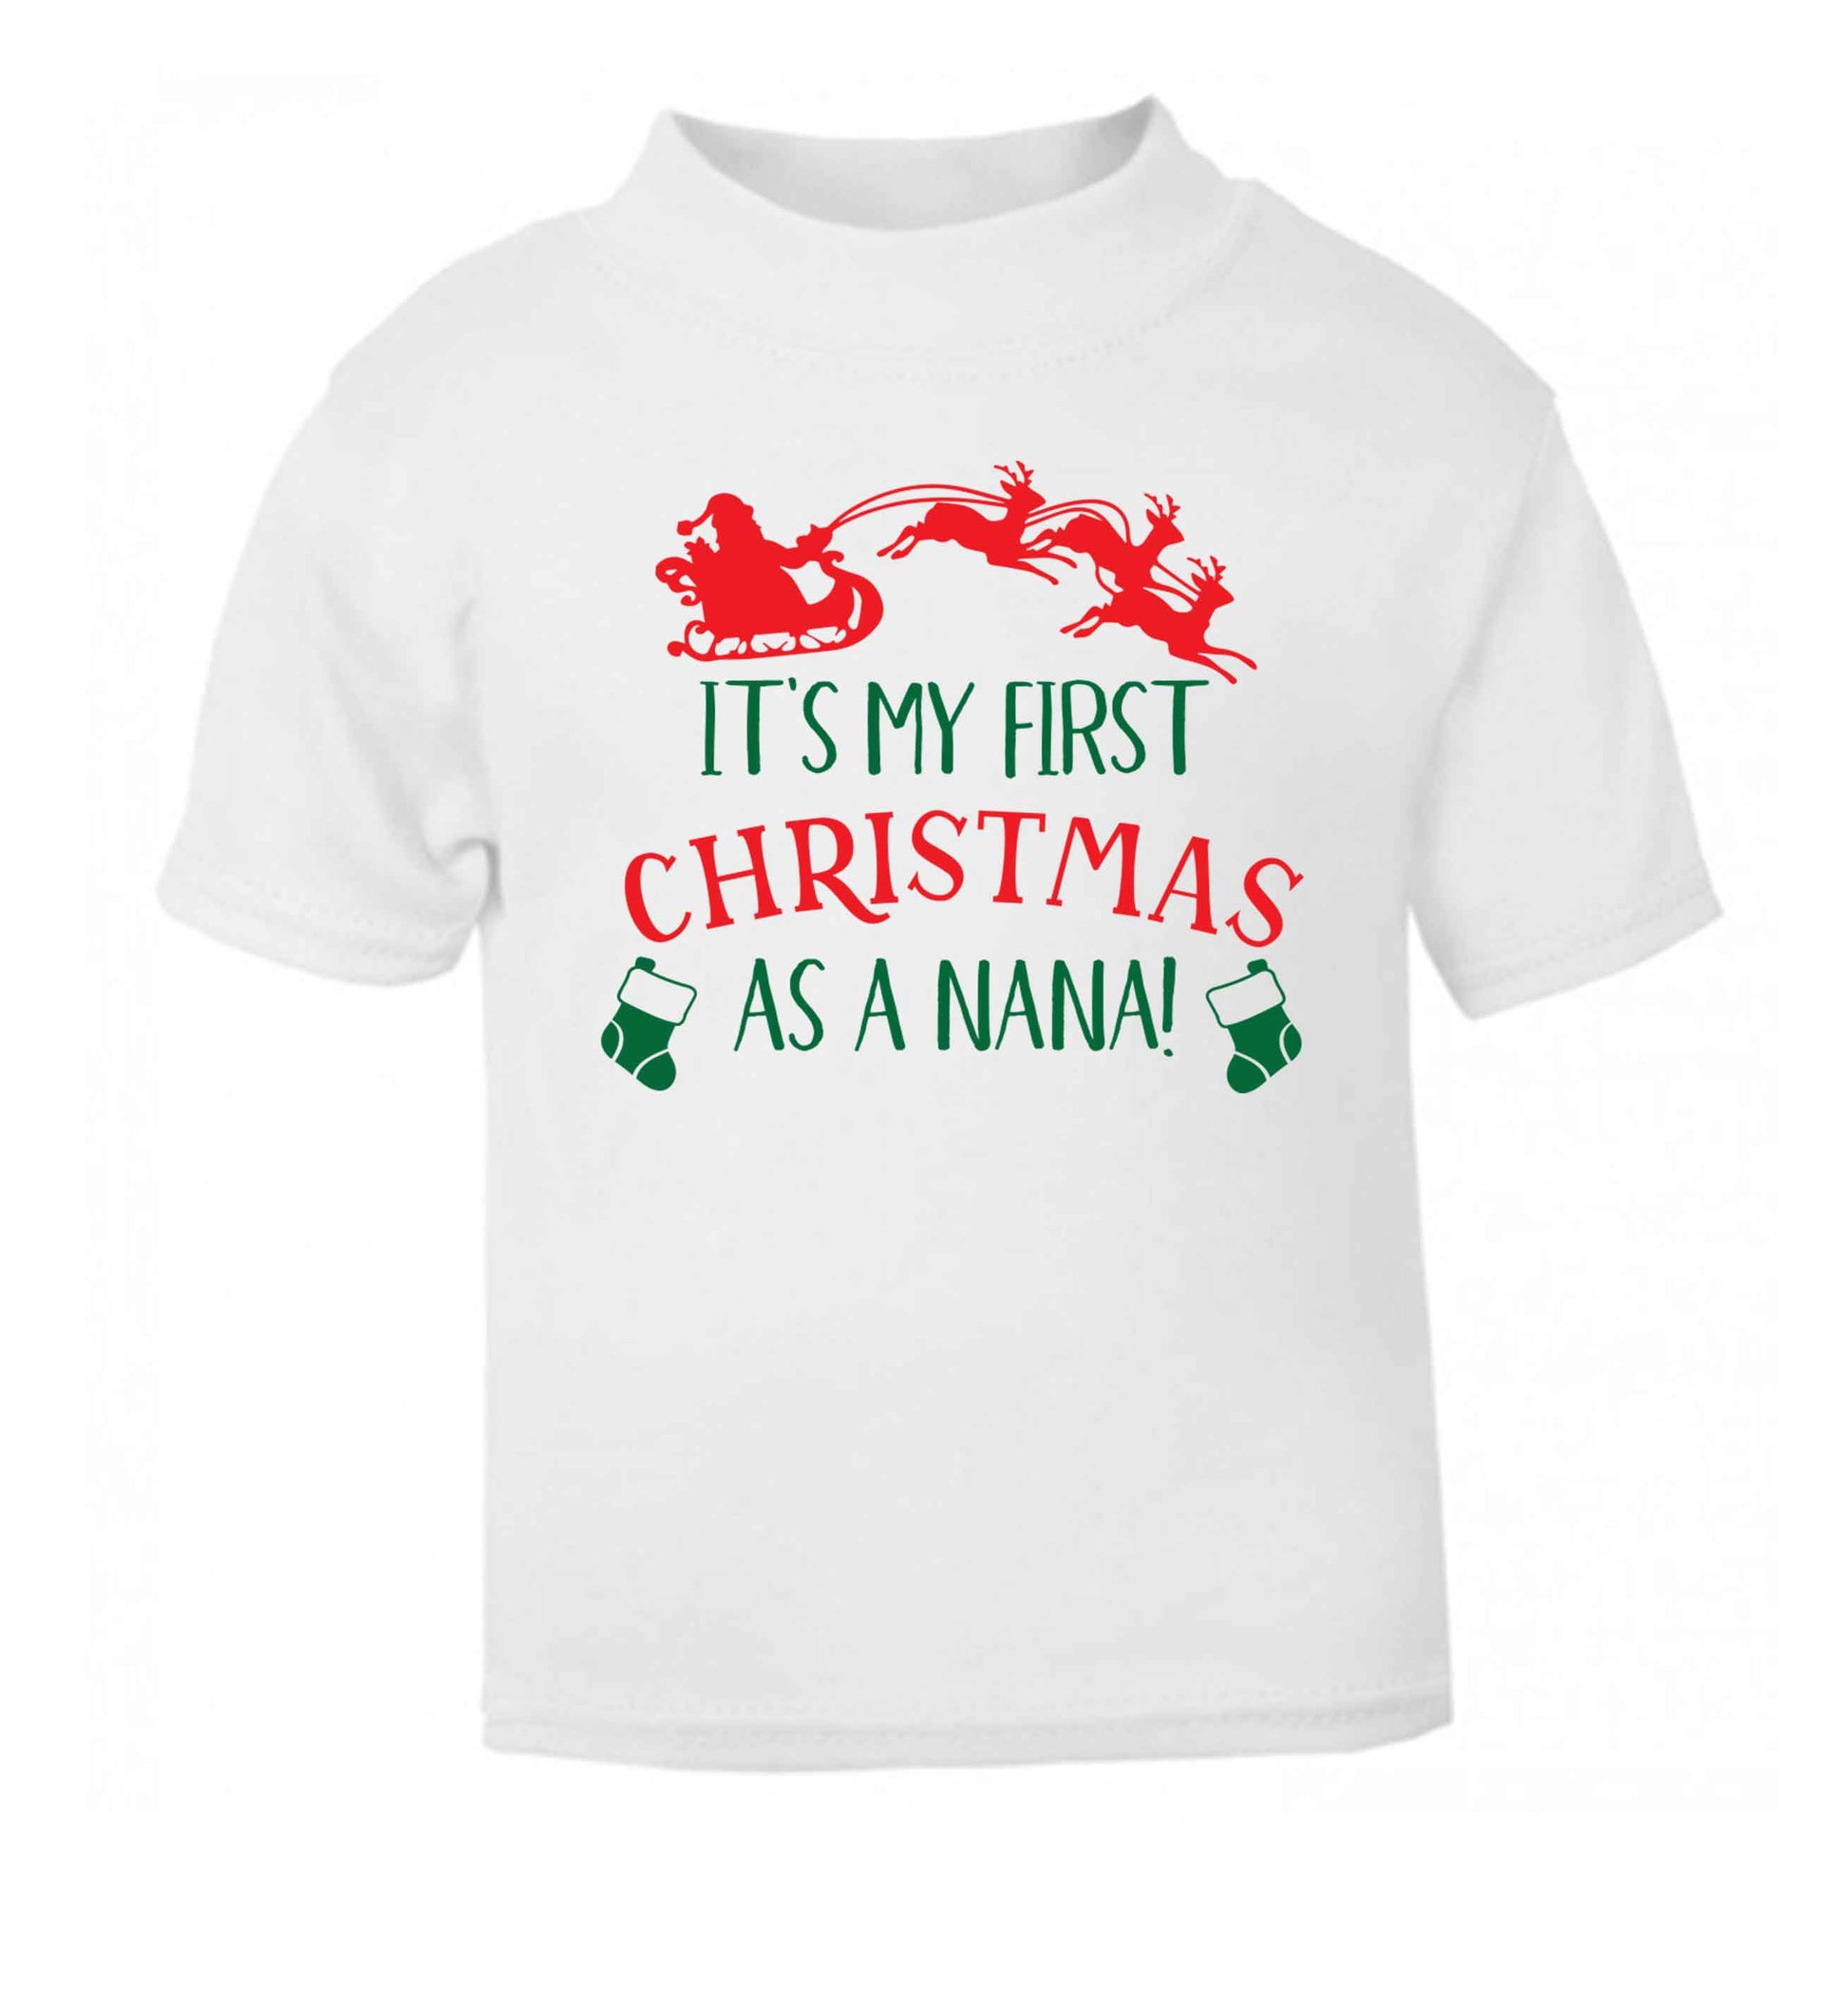 It's my first Christmas as a nana white Baby Toddler Tshirt 2 Years